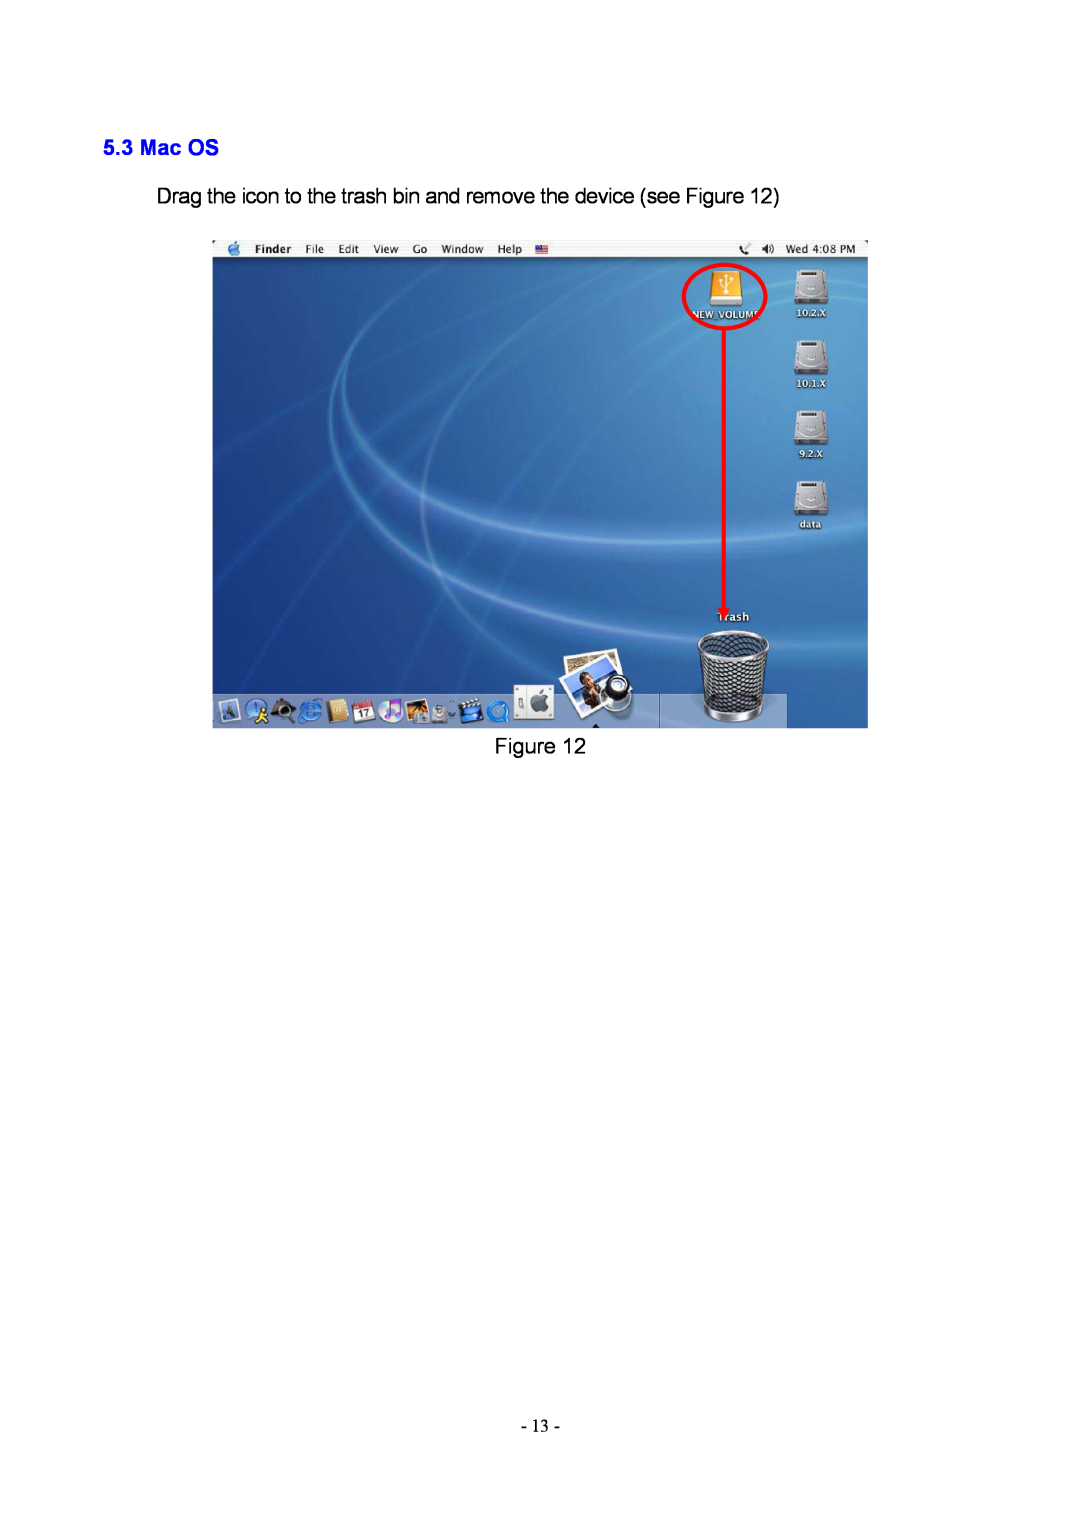 Rosewill RX20-U2 user manual Mac OS, Drag the icon to the trash bin and remove the device see Figure 